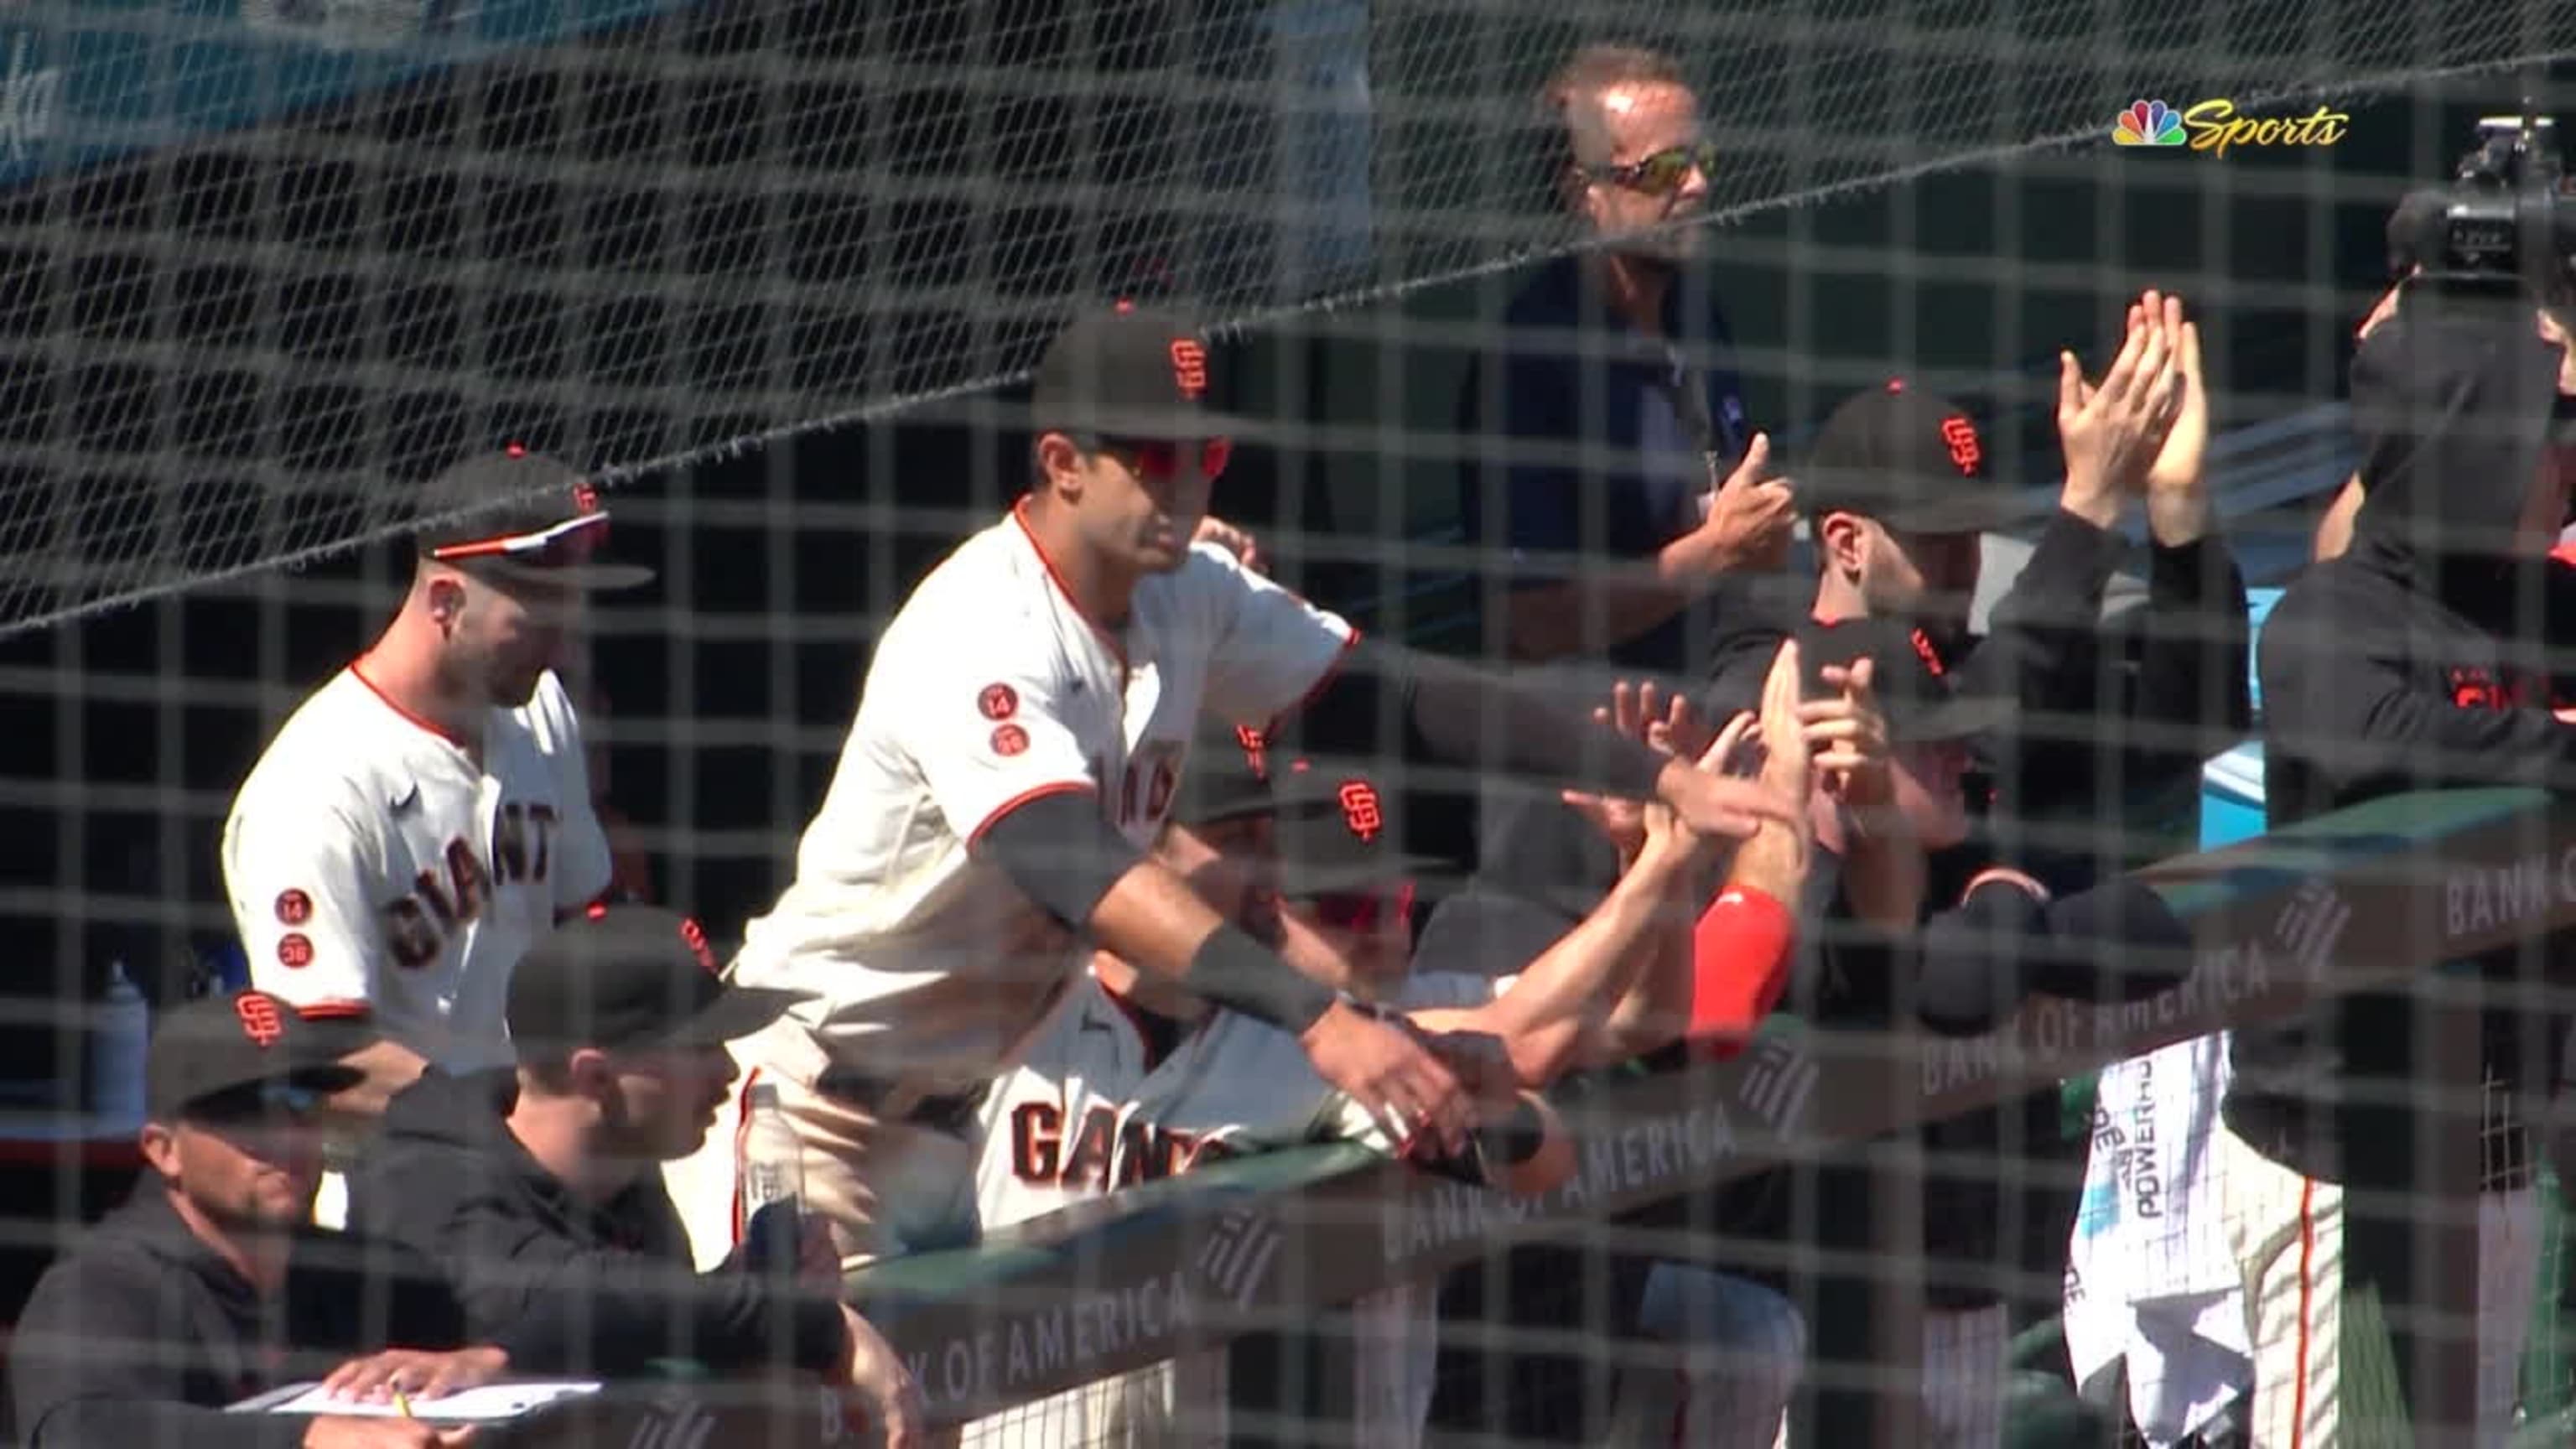 Doval escapes in the 9th as Giants hold off Yanks - CBS New York